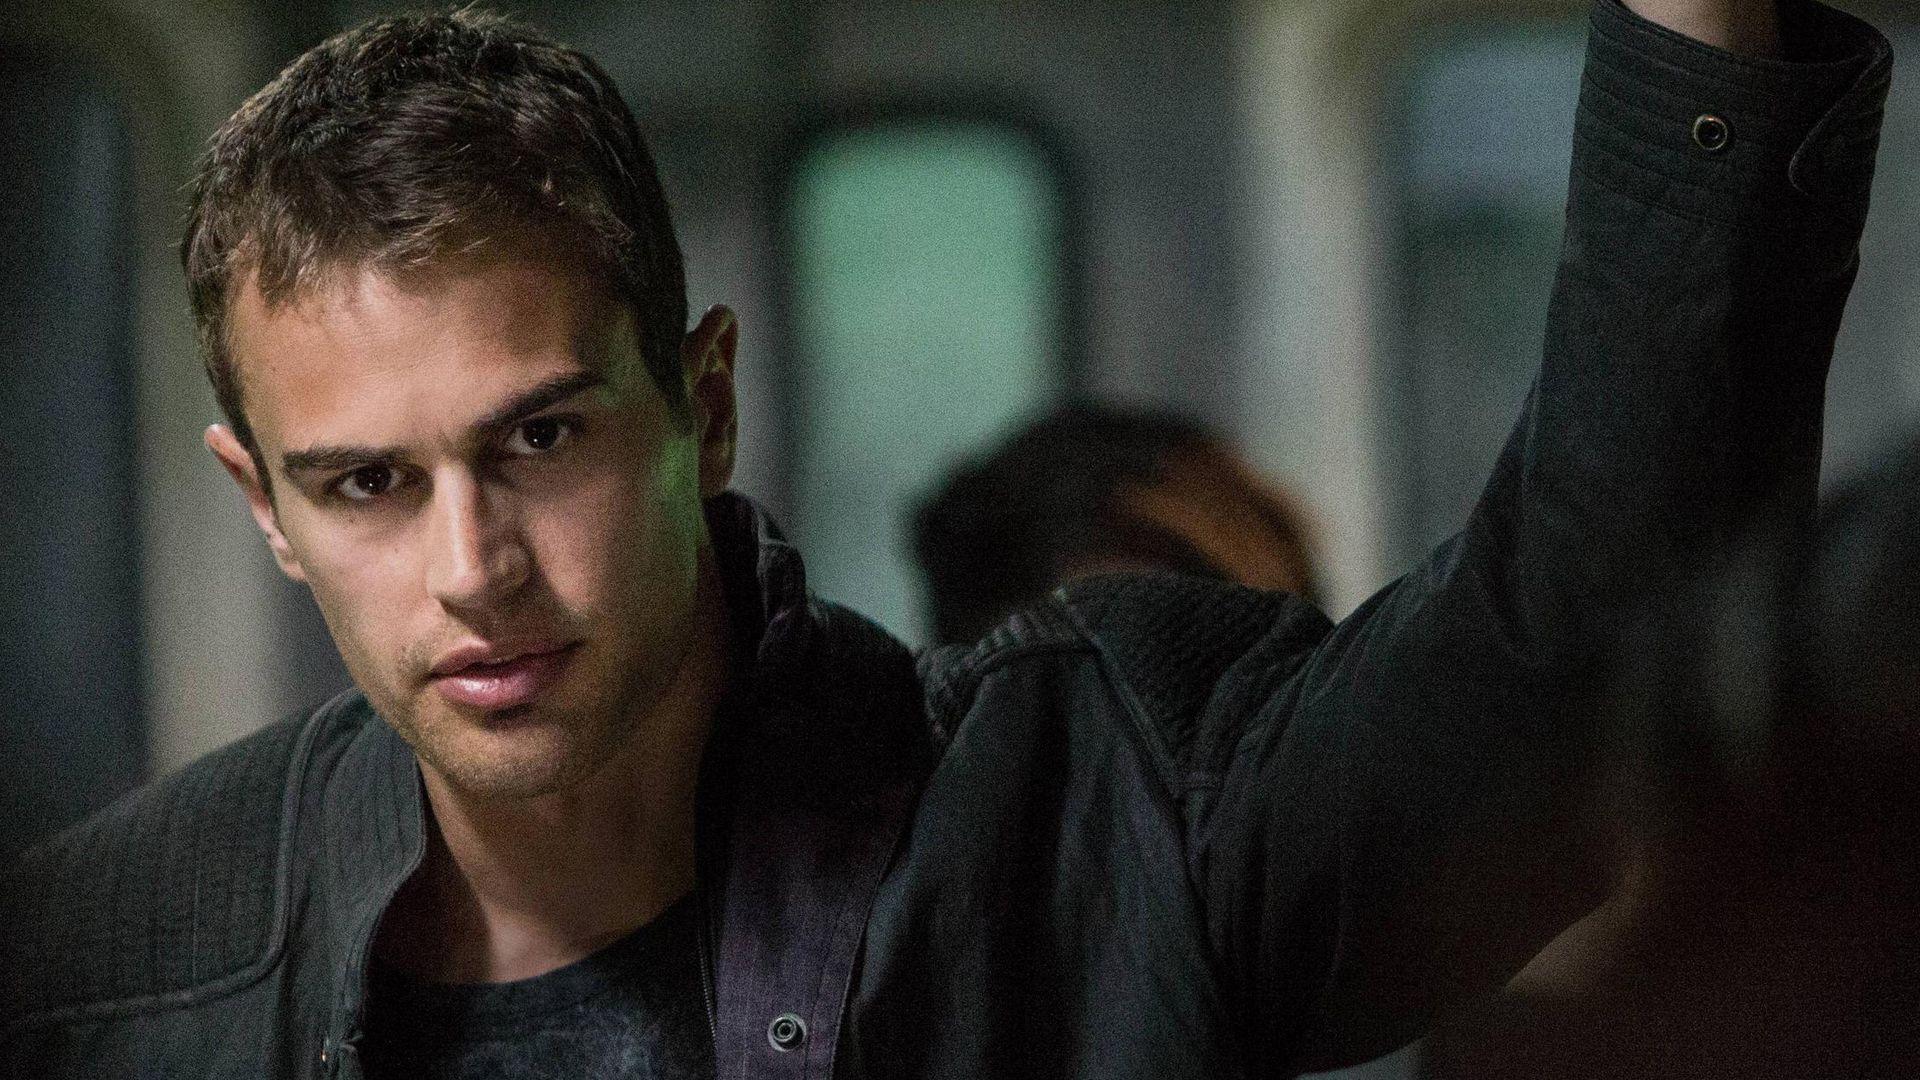 Divergent Movie Theo James 2014 Photo Collection. Men Perfumes